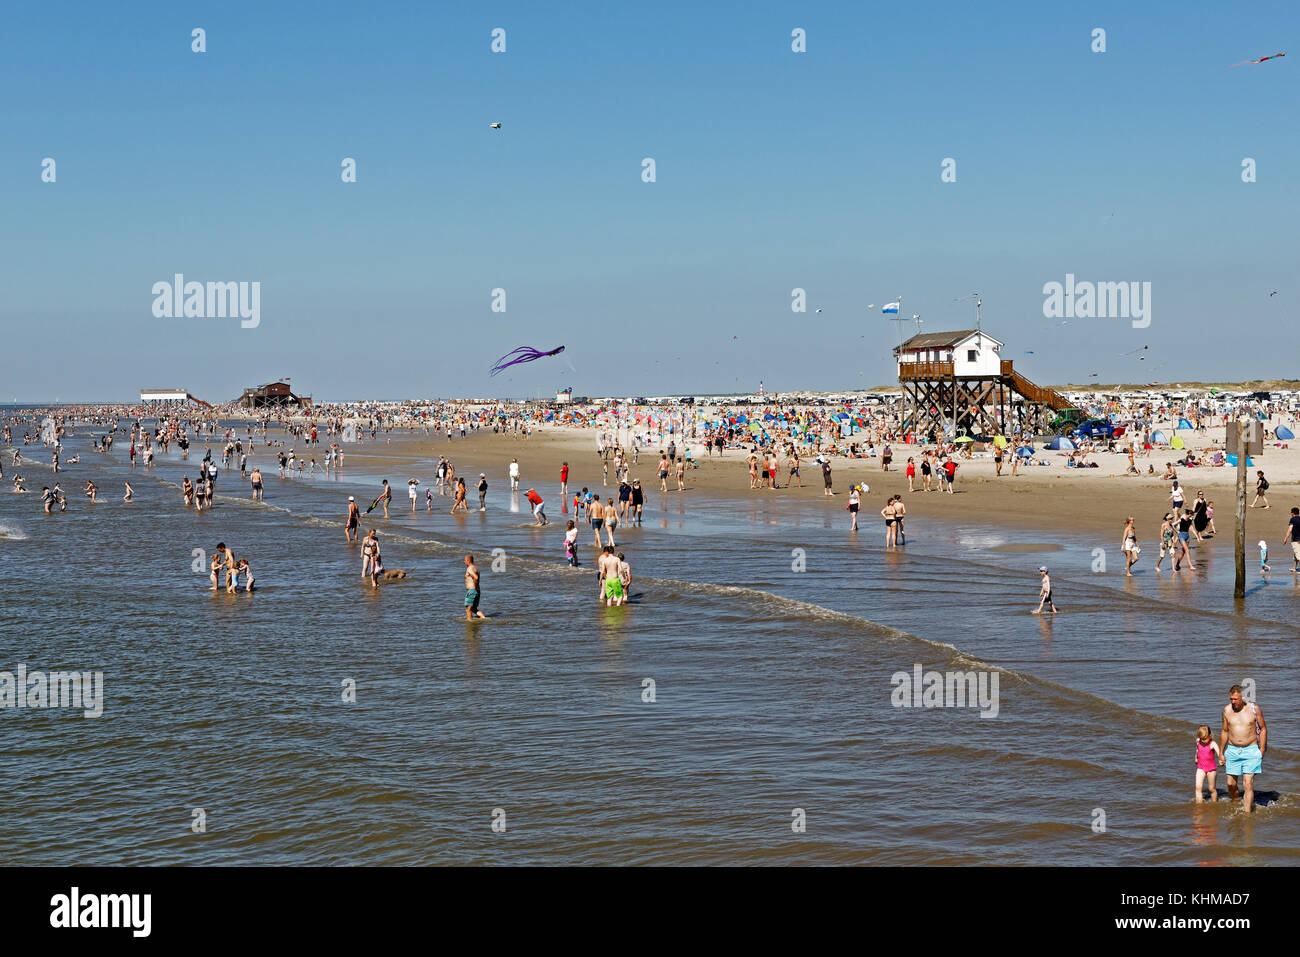 Spiaggia, st peter-ording, Frisia settentrionale, SCHLESWIG-HOLSTEIN, Germania, Foto Stock